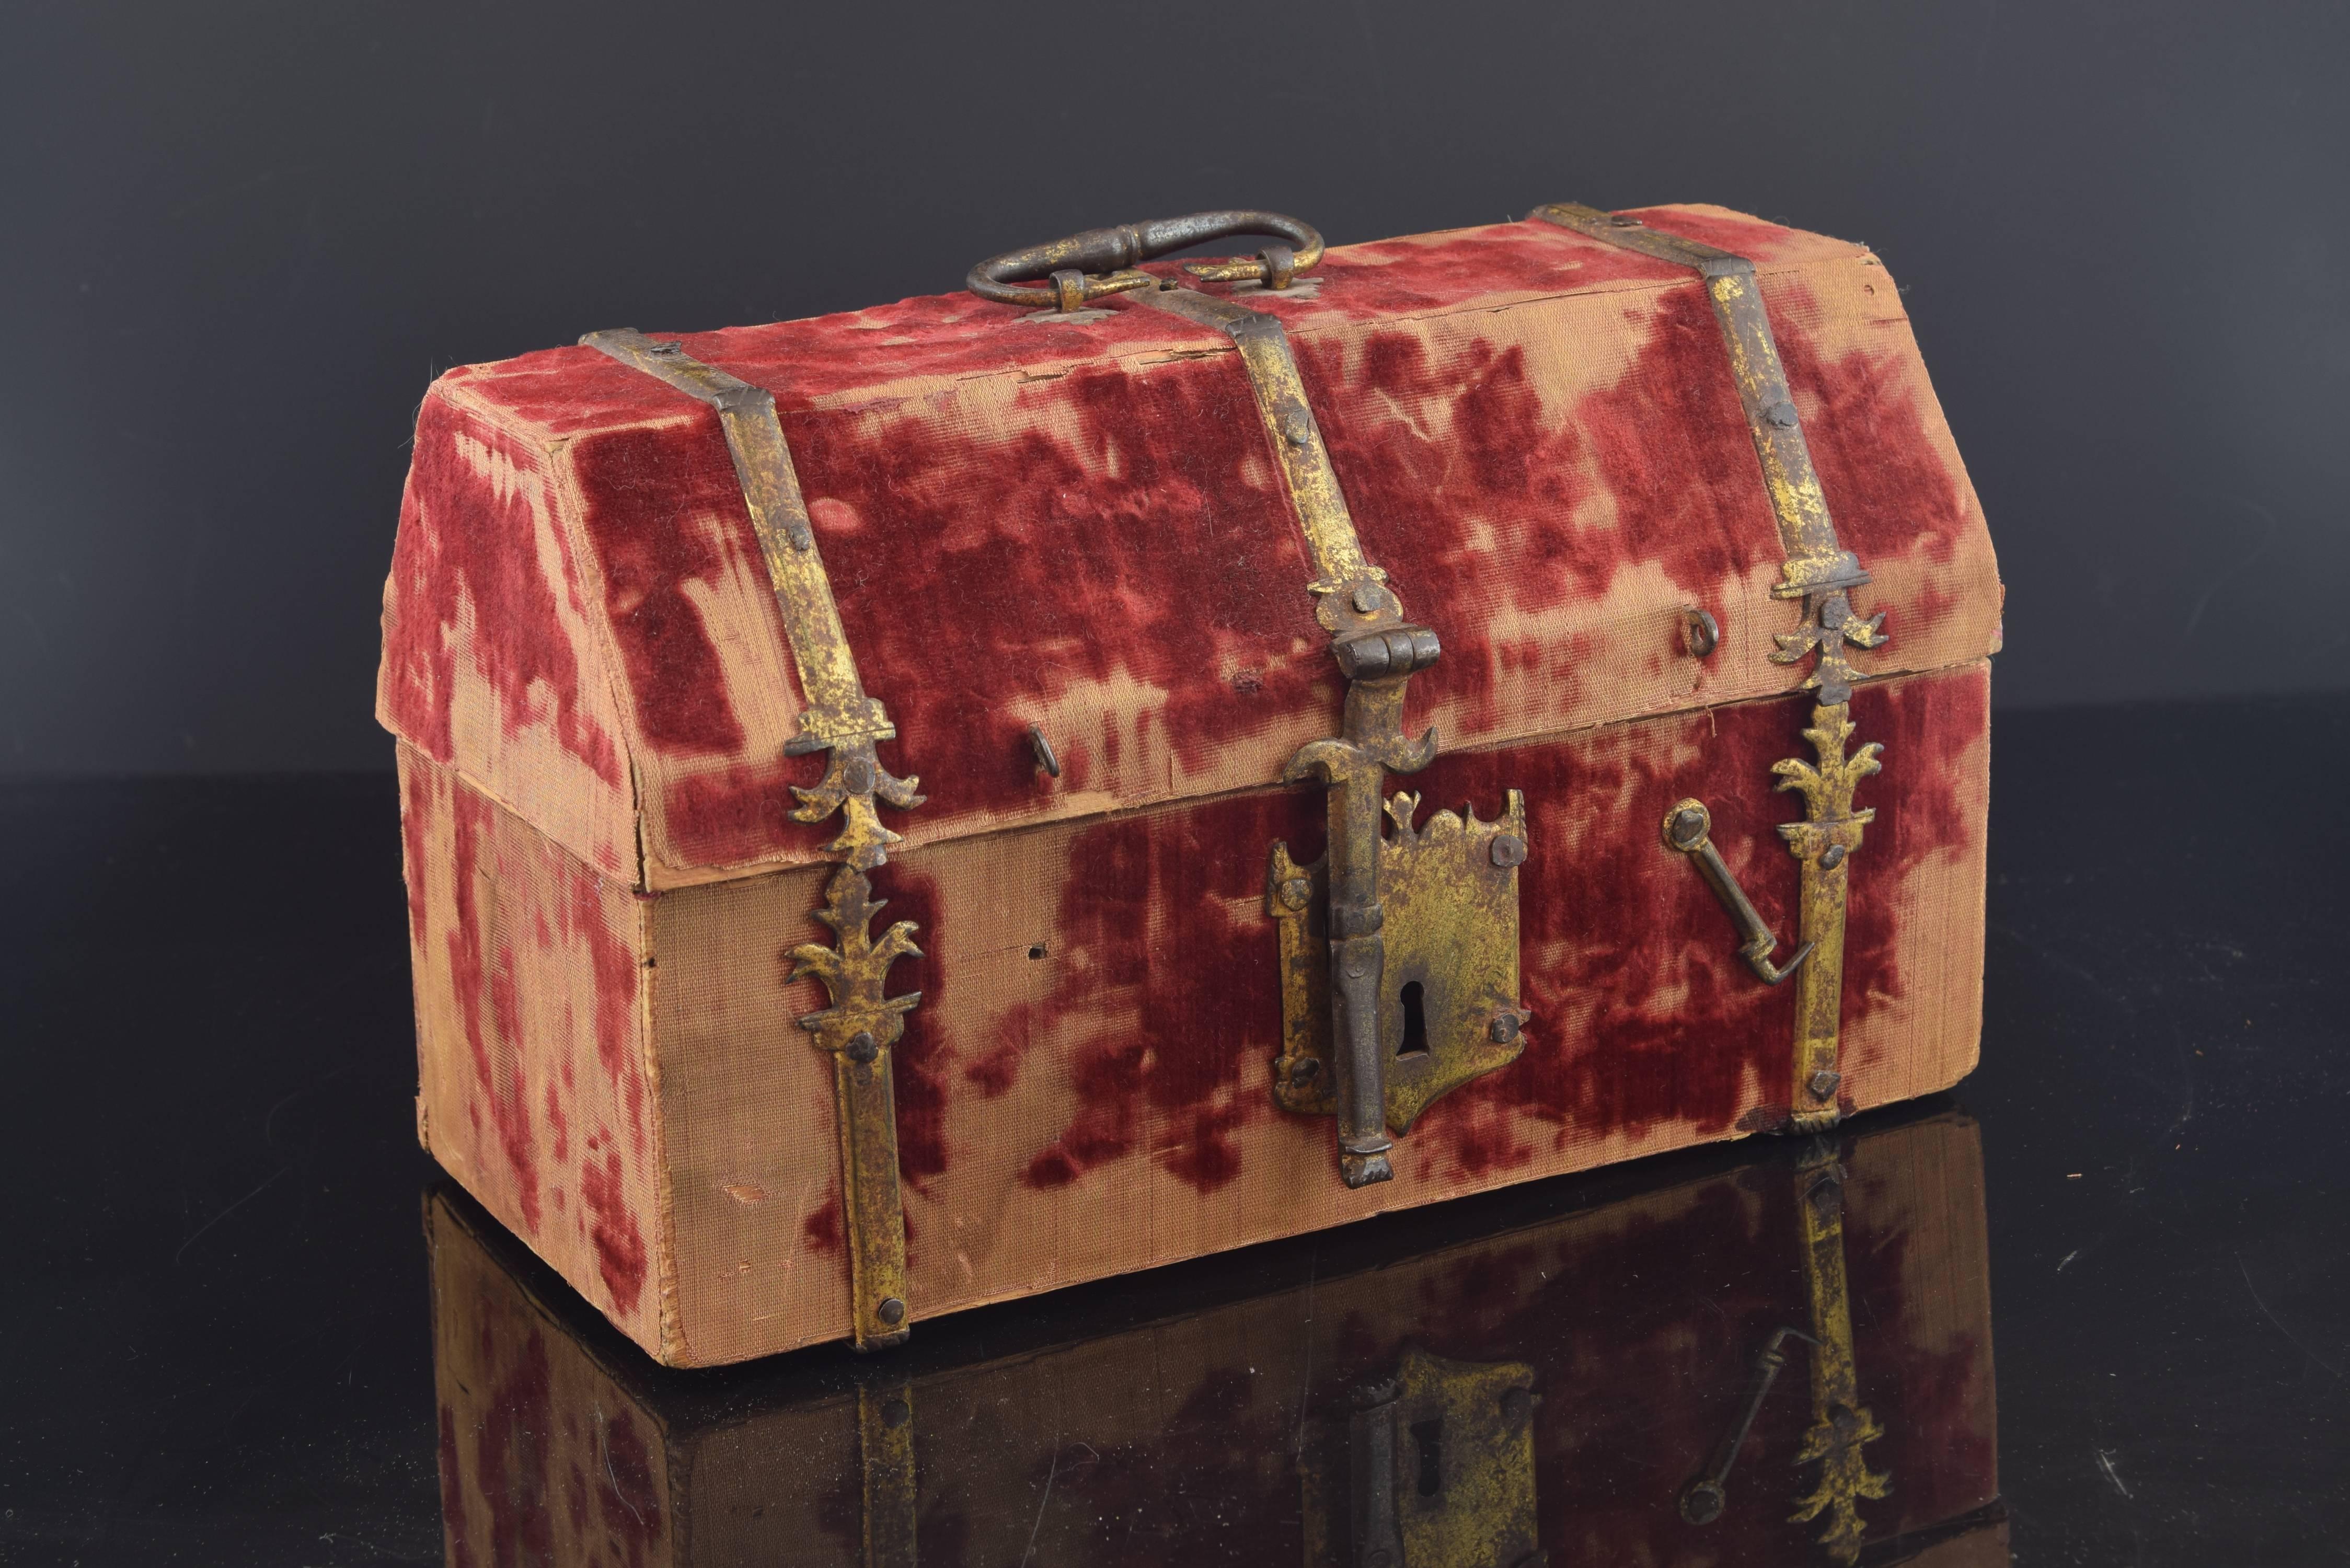 Rectangular base and smooth walls with top with sloping sides and straight top (troncopiramidal) casket made of carved wood. It is worth noting that the red velvet used to cover some of the main examples of this type of works, and to keep some